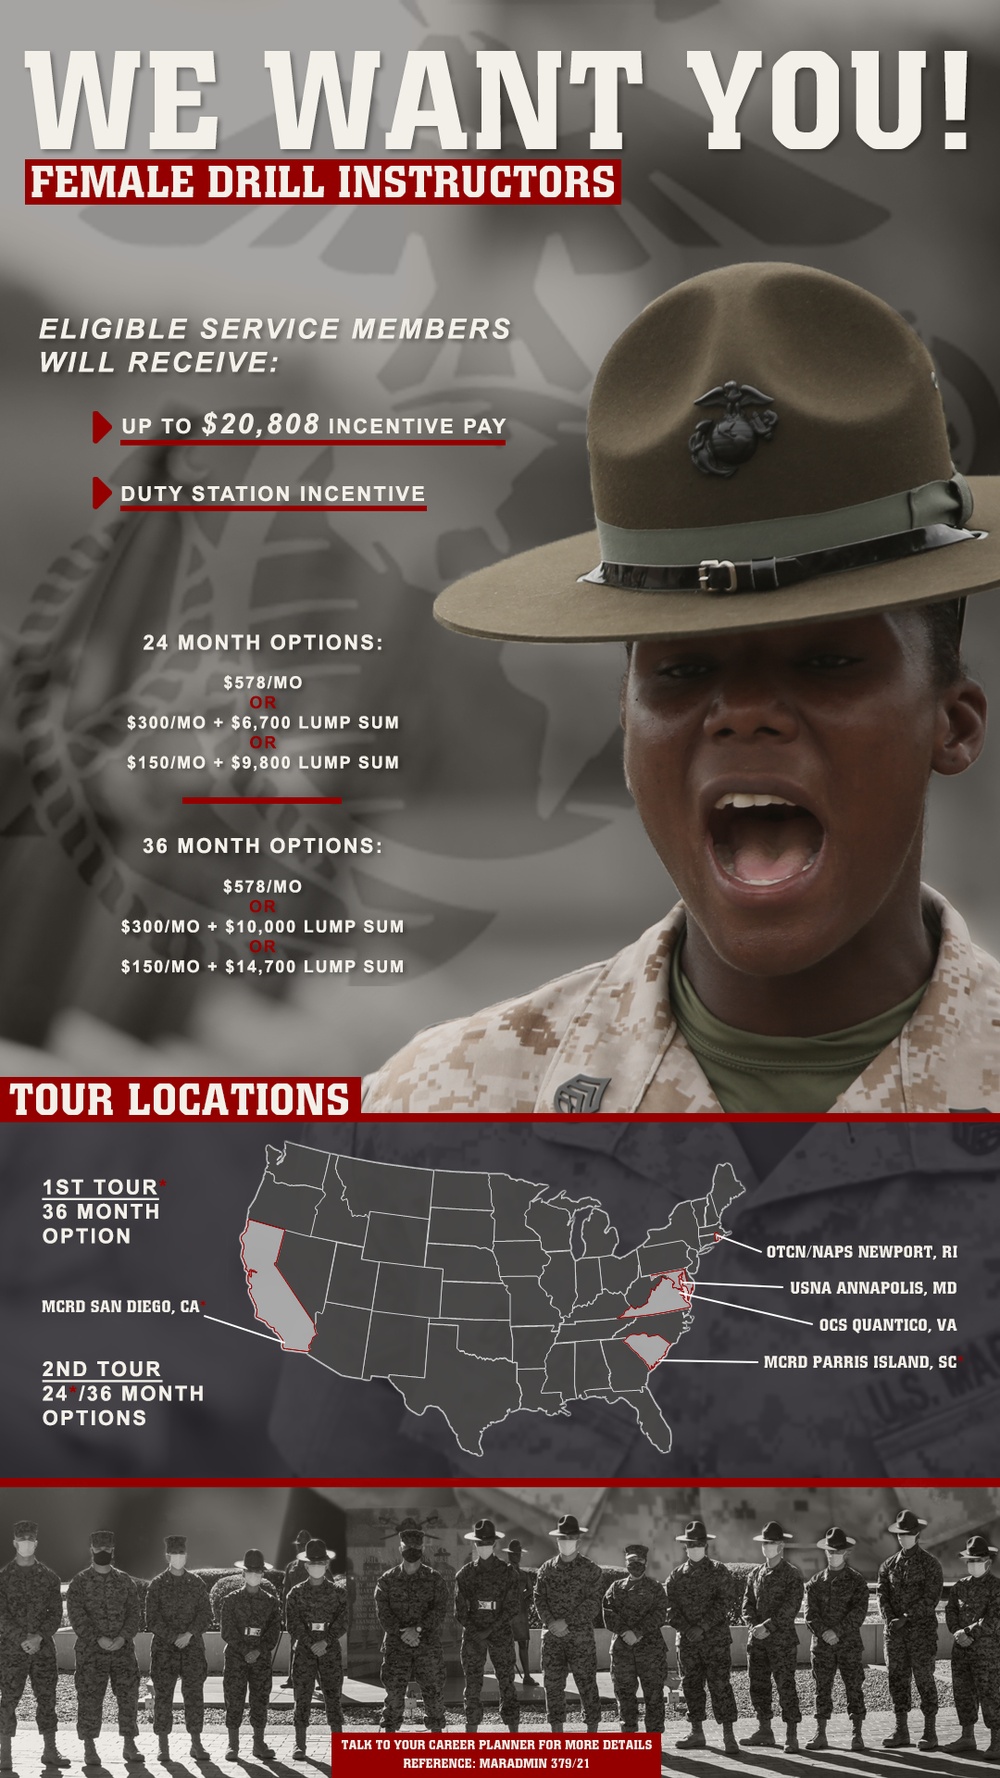 FY22 Solicitation for Female Drill Instructors